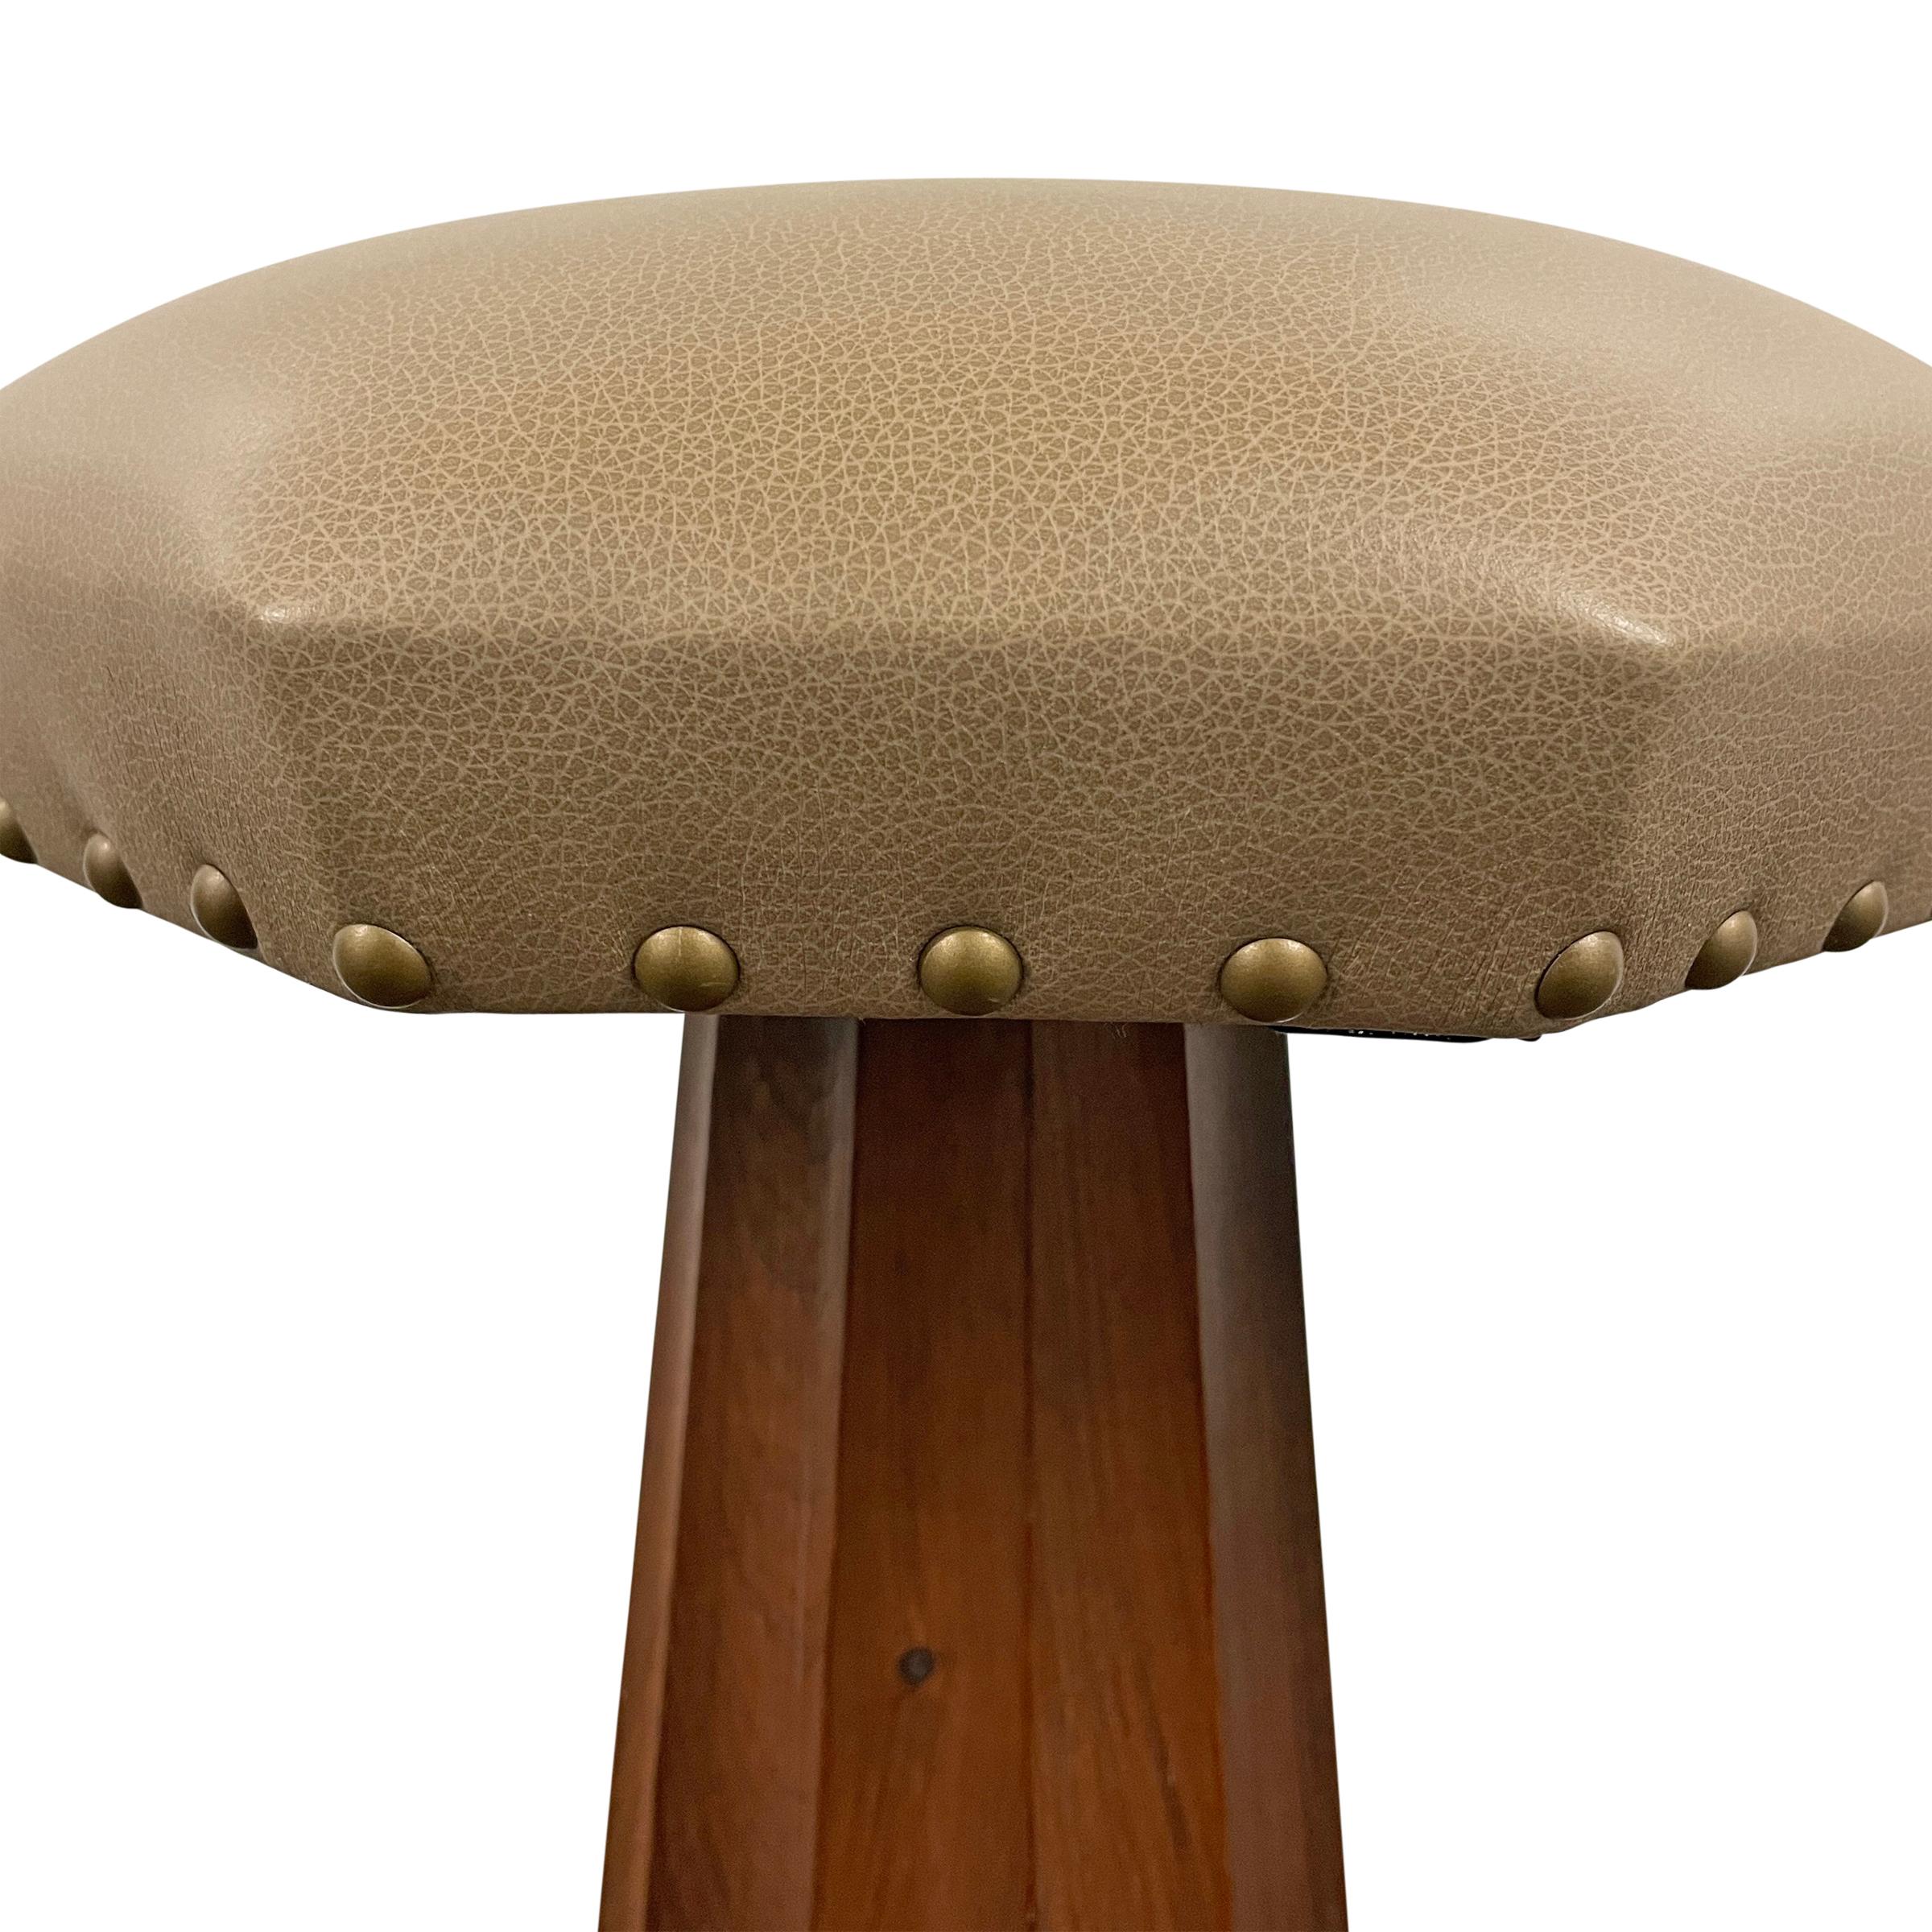 Early 20th Century American Empire Stool For Sale 1